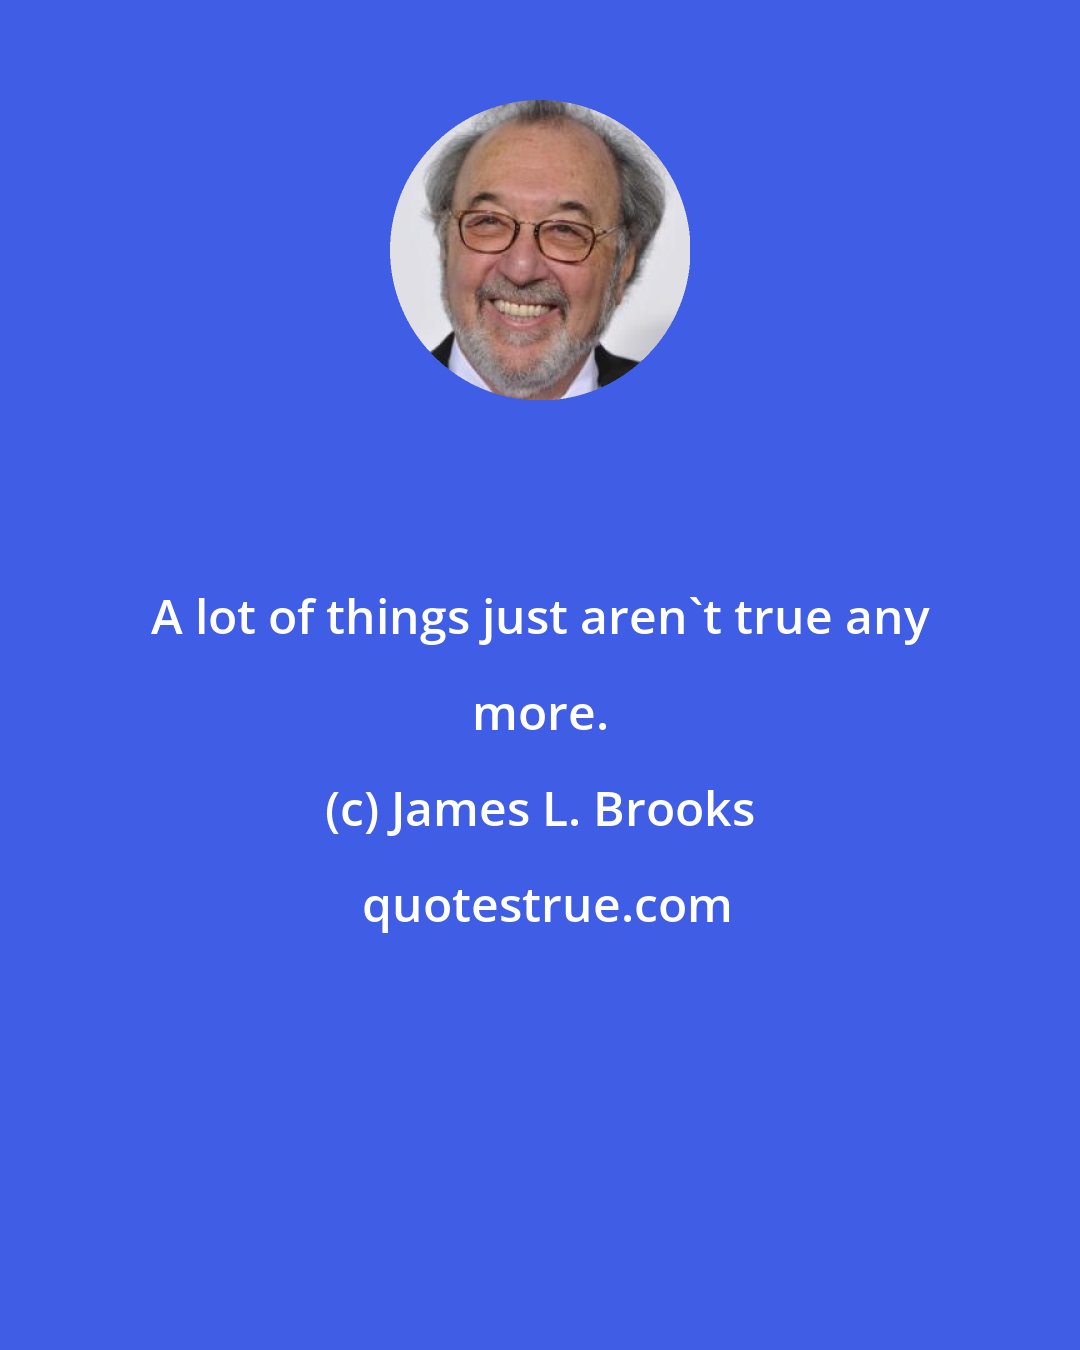 James L. Brooks: A lot of things just aren't true any more.